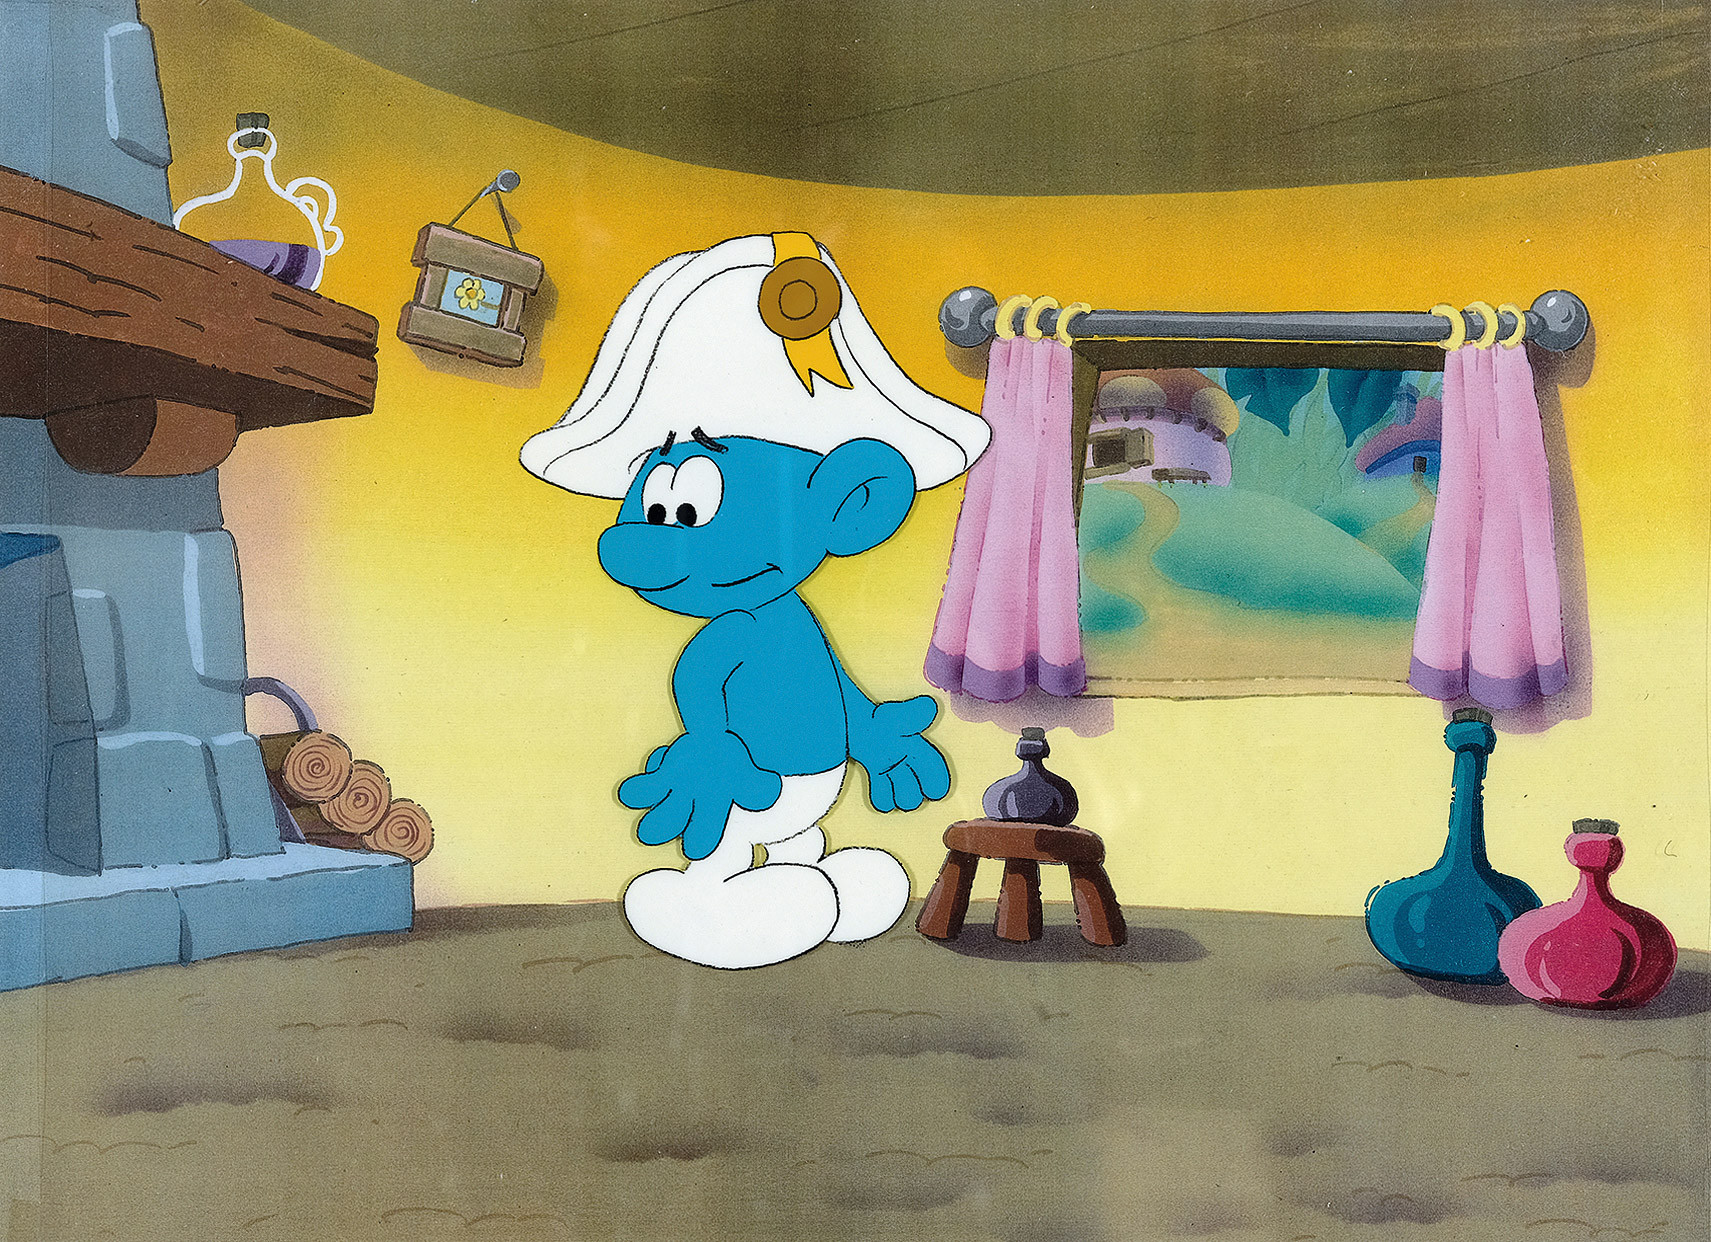 THE LONELY SMURF AT HOME